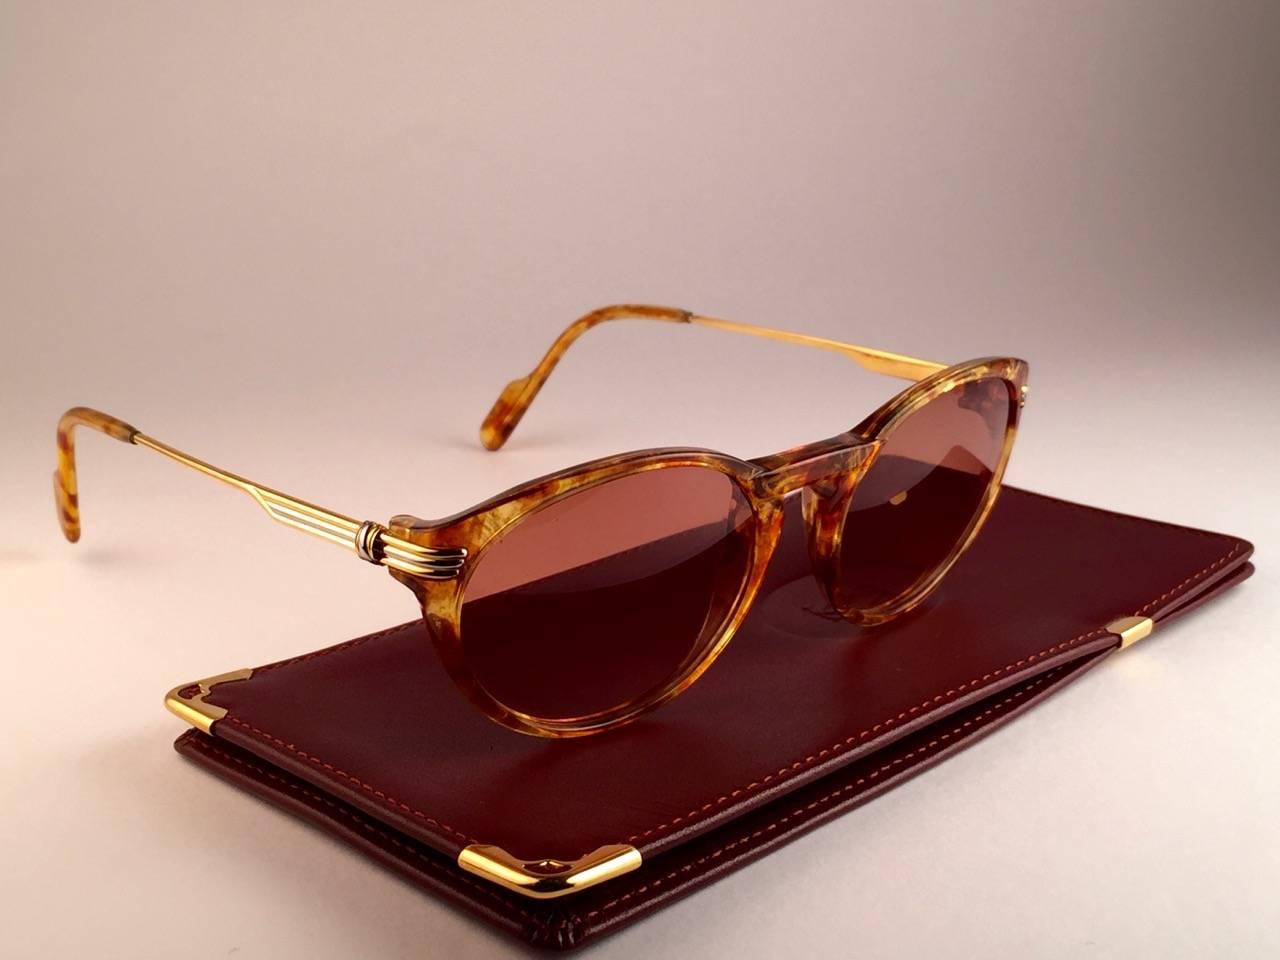 
New Cartier Aurore Classic sunglasses with brown (uv protection) lenses. Small size 50mm/18 frame has the famous real gold and white gold accents on the temples. 100% original. All hallmarks. Cartier gold signs on the earpaddles. These are like a